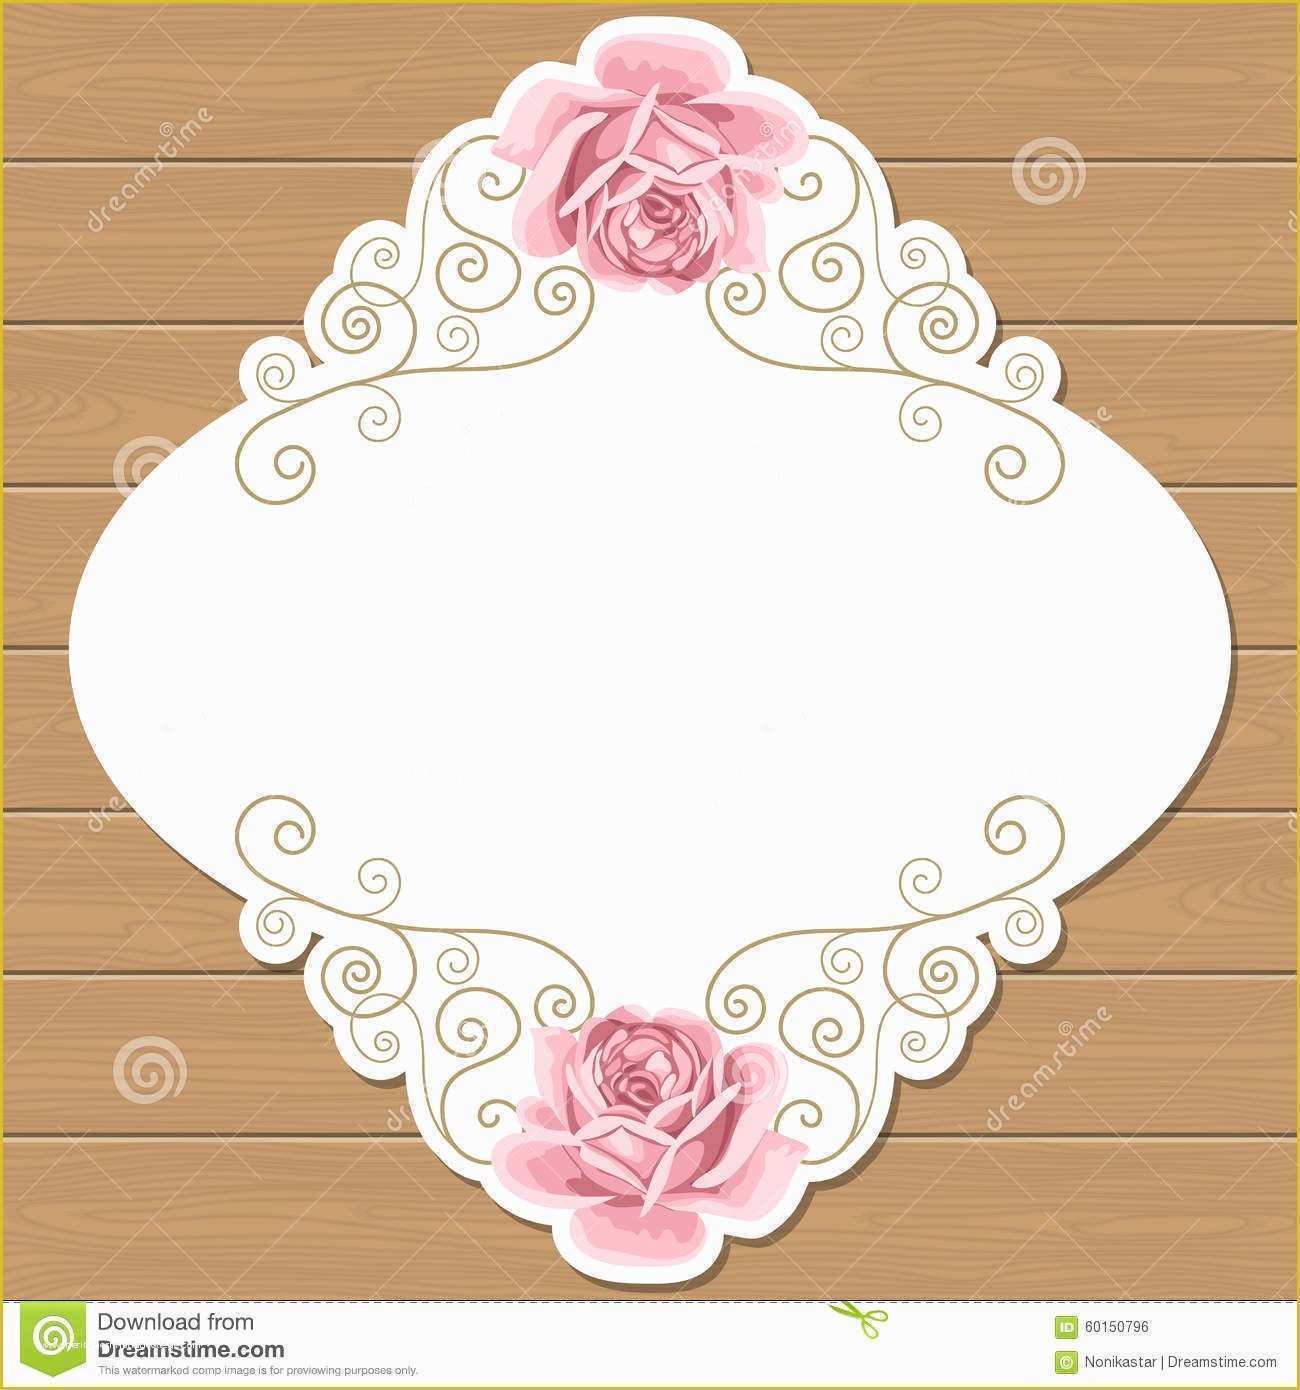 Shabby Chic Birthday Invitation Templates Free Of Wood Background with Roses Stock Vector Illustration Of